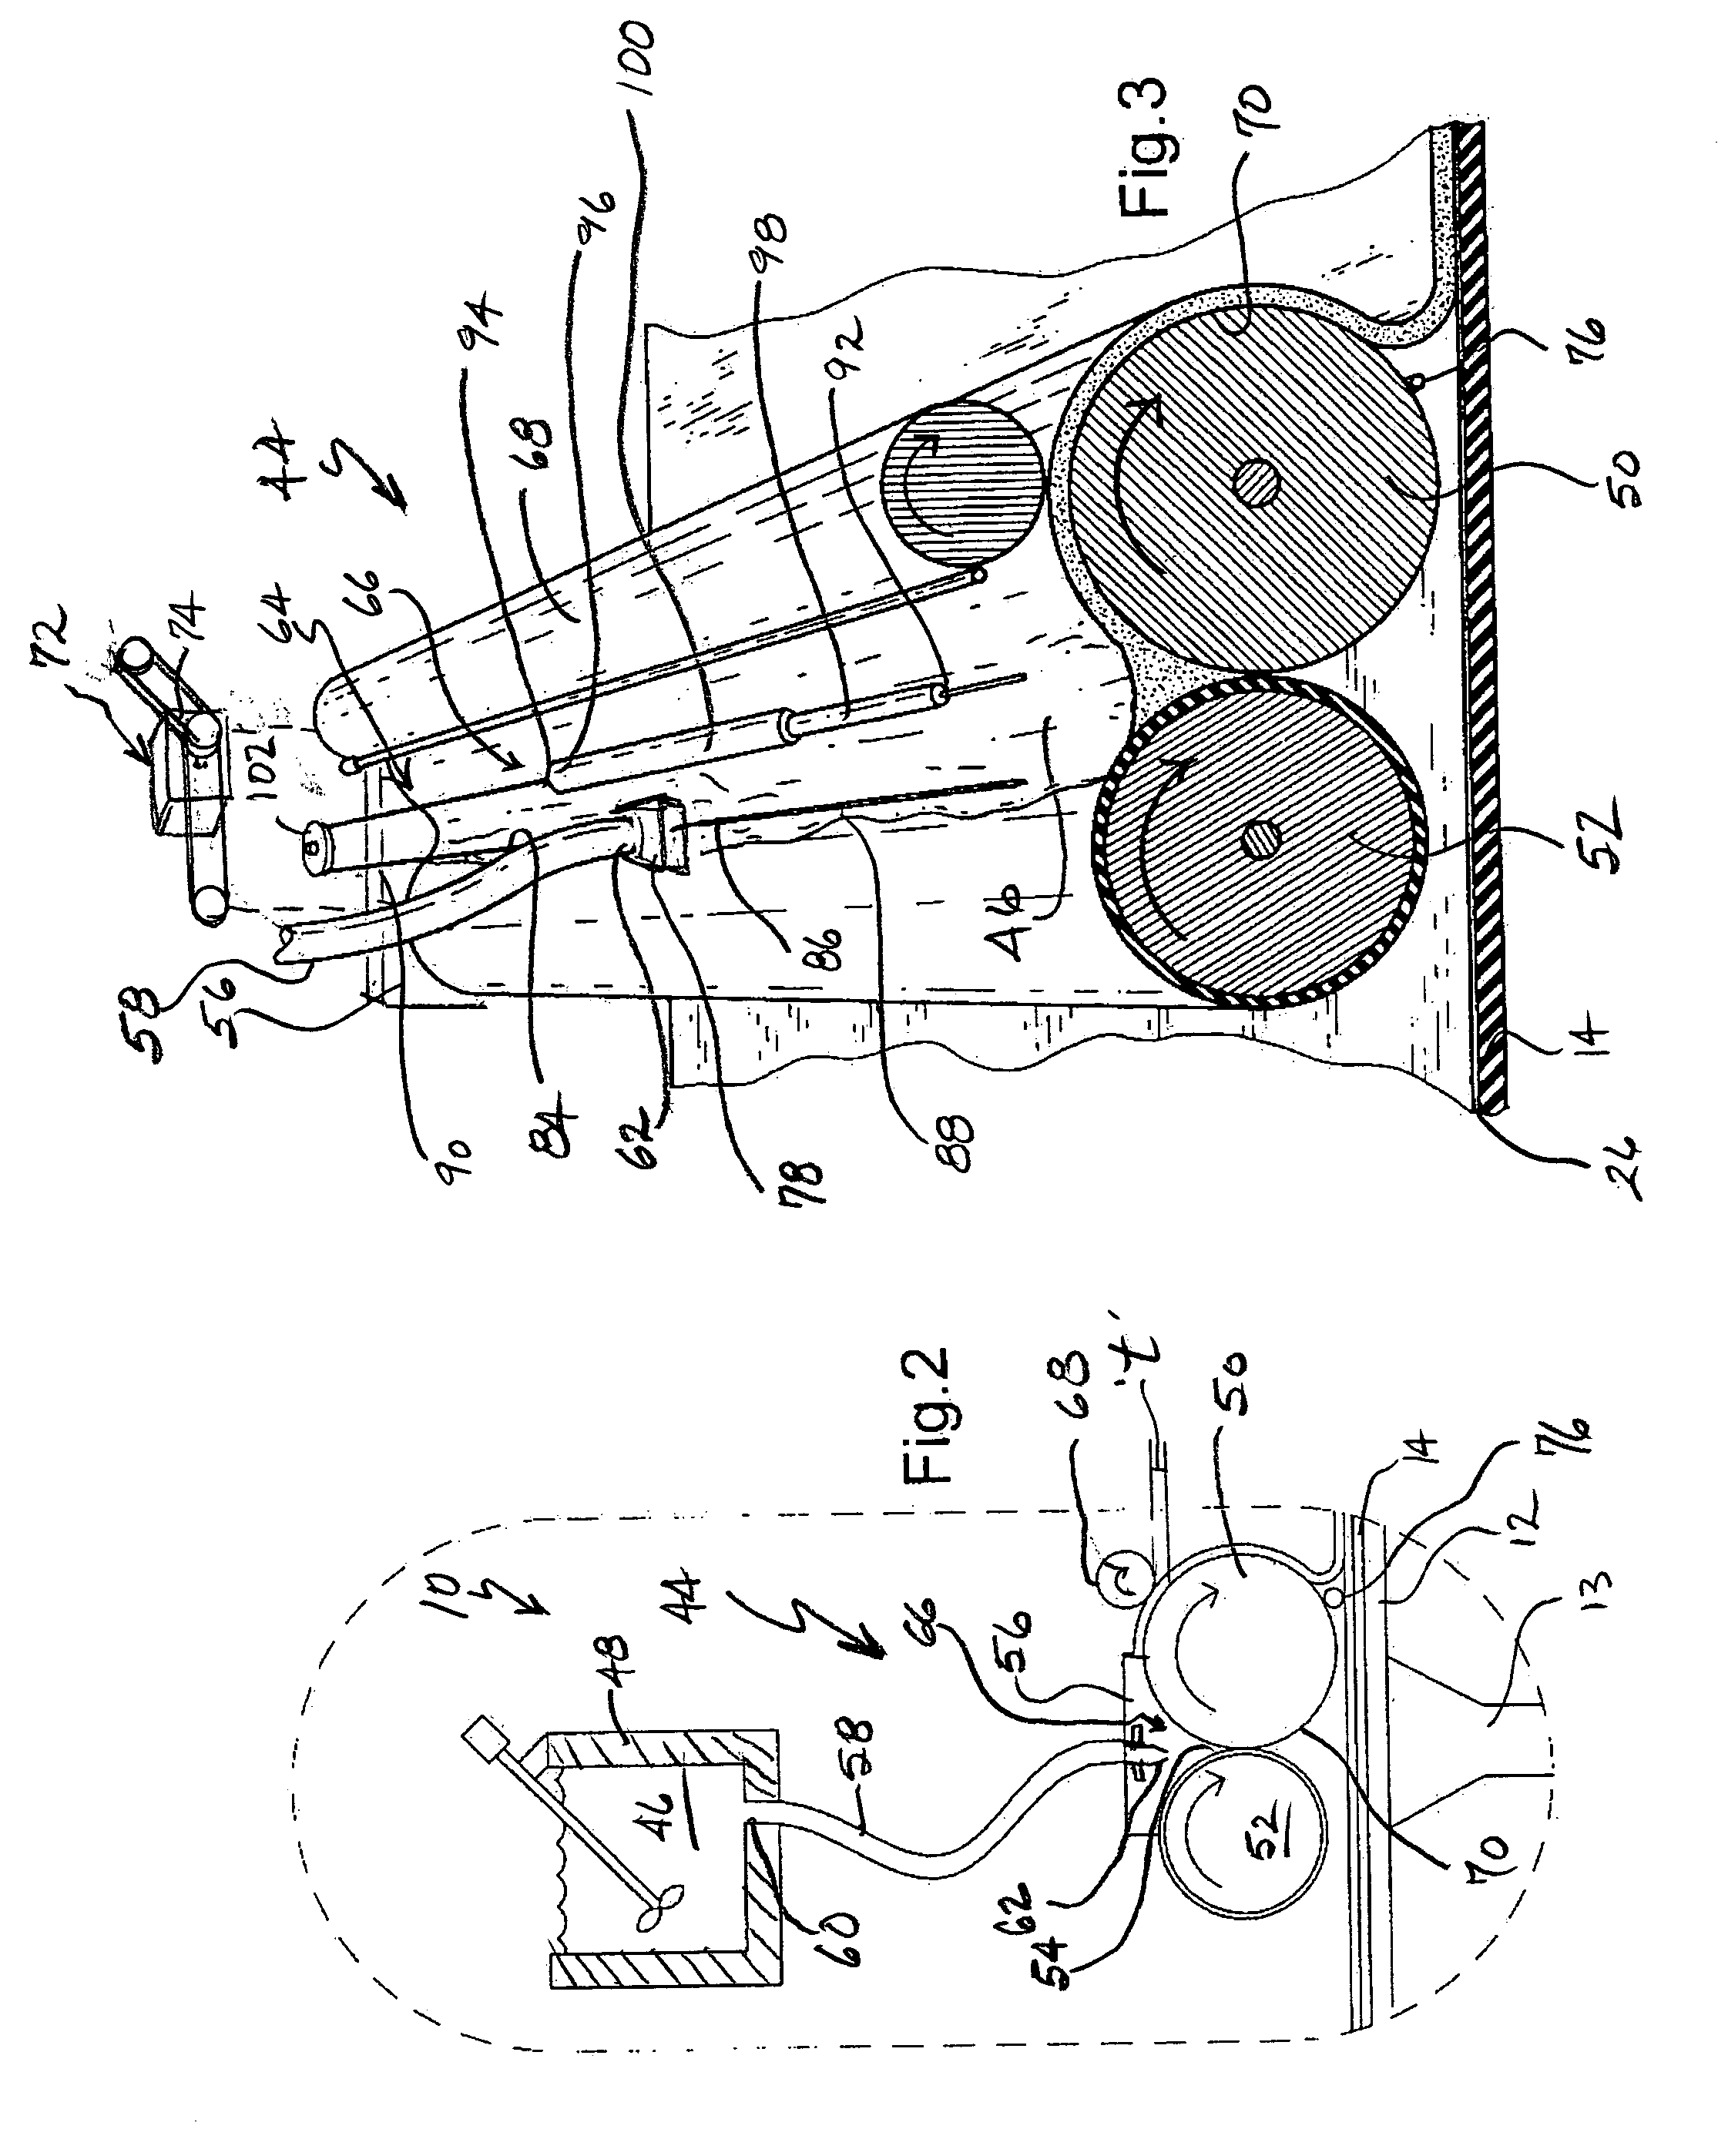 Slurry feed apparatus for fiber-reinforced structural cementitious panel production